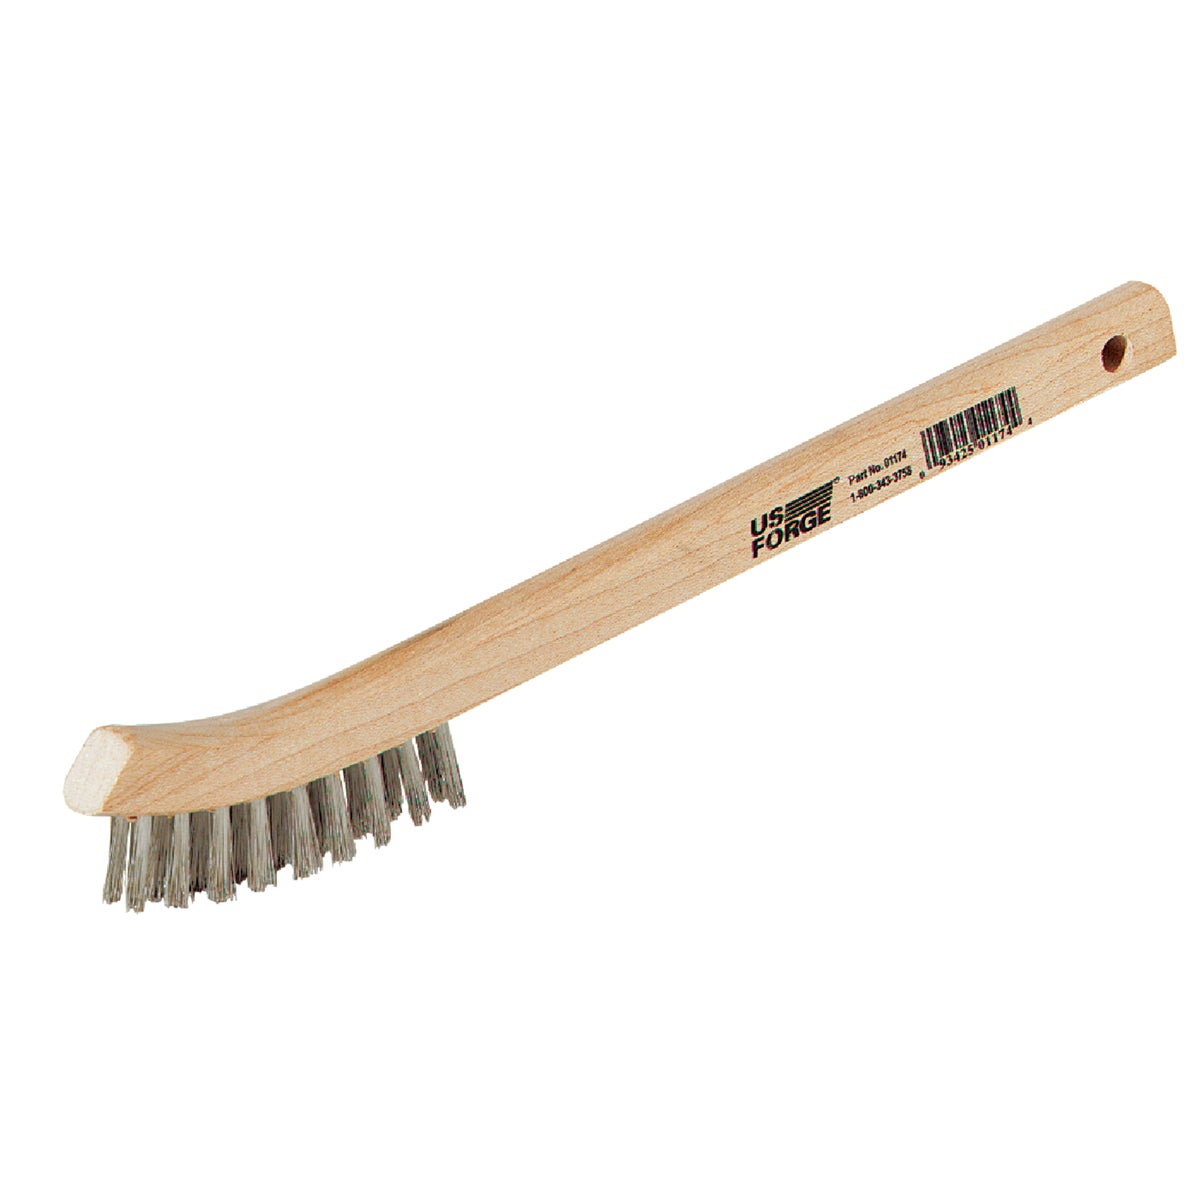 Item 394033, Strong and durable with solidly imbedded bristles.